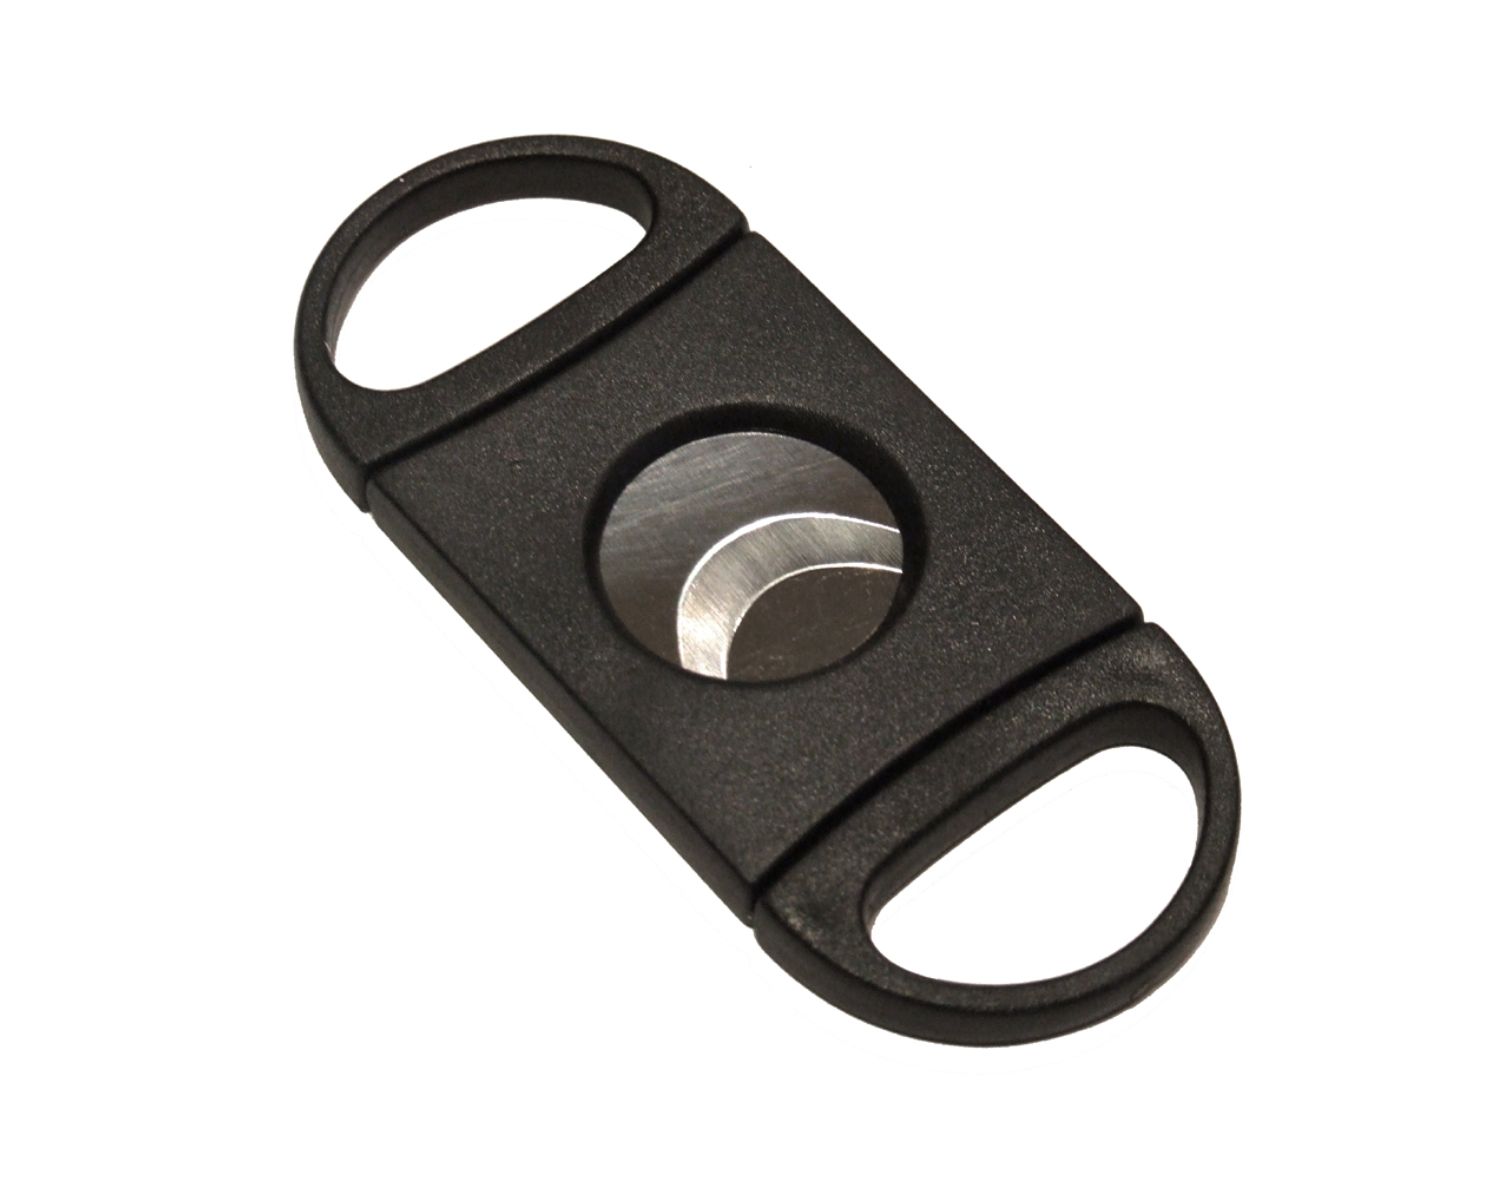 Cigar Cutter Review: The Perfect Tool for Precision Cuts